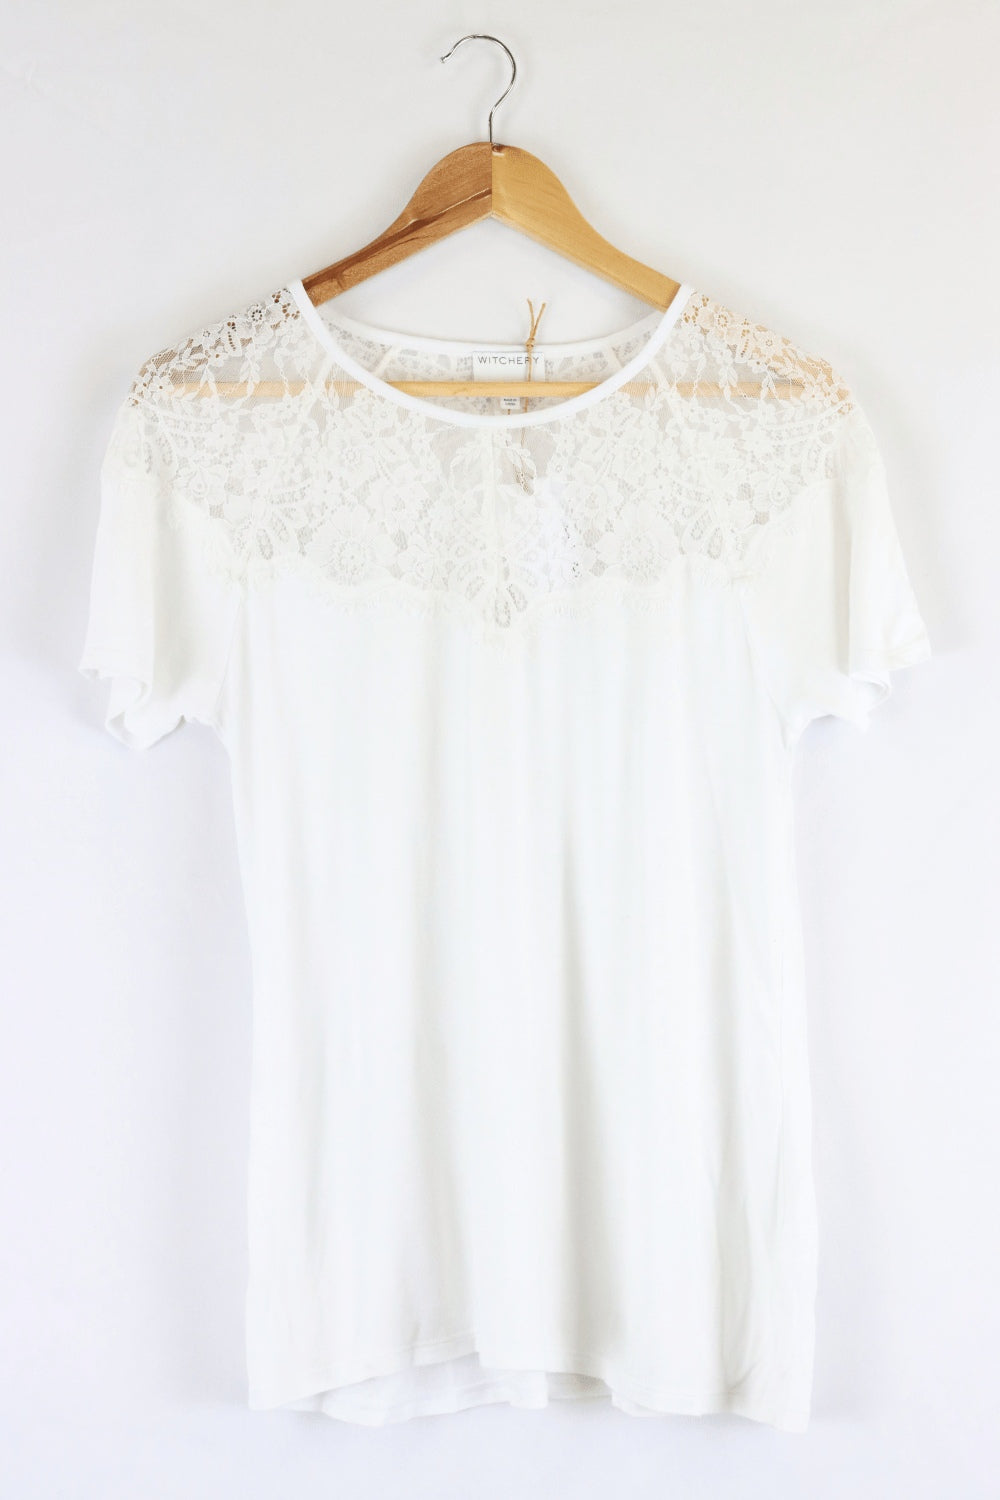 Witchery White Top With Lace S